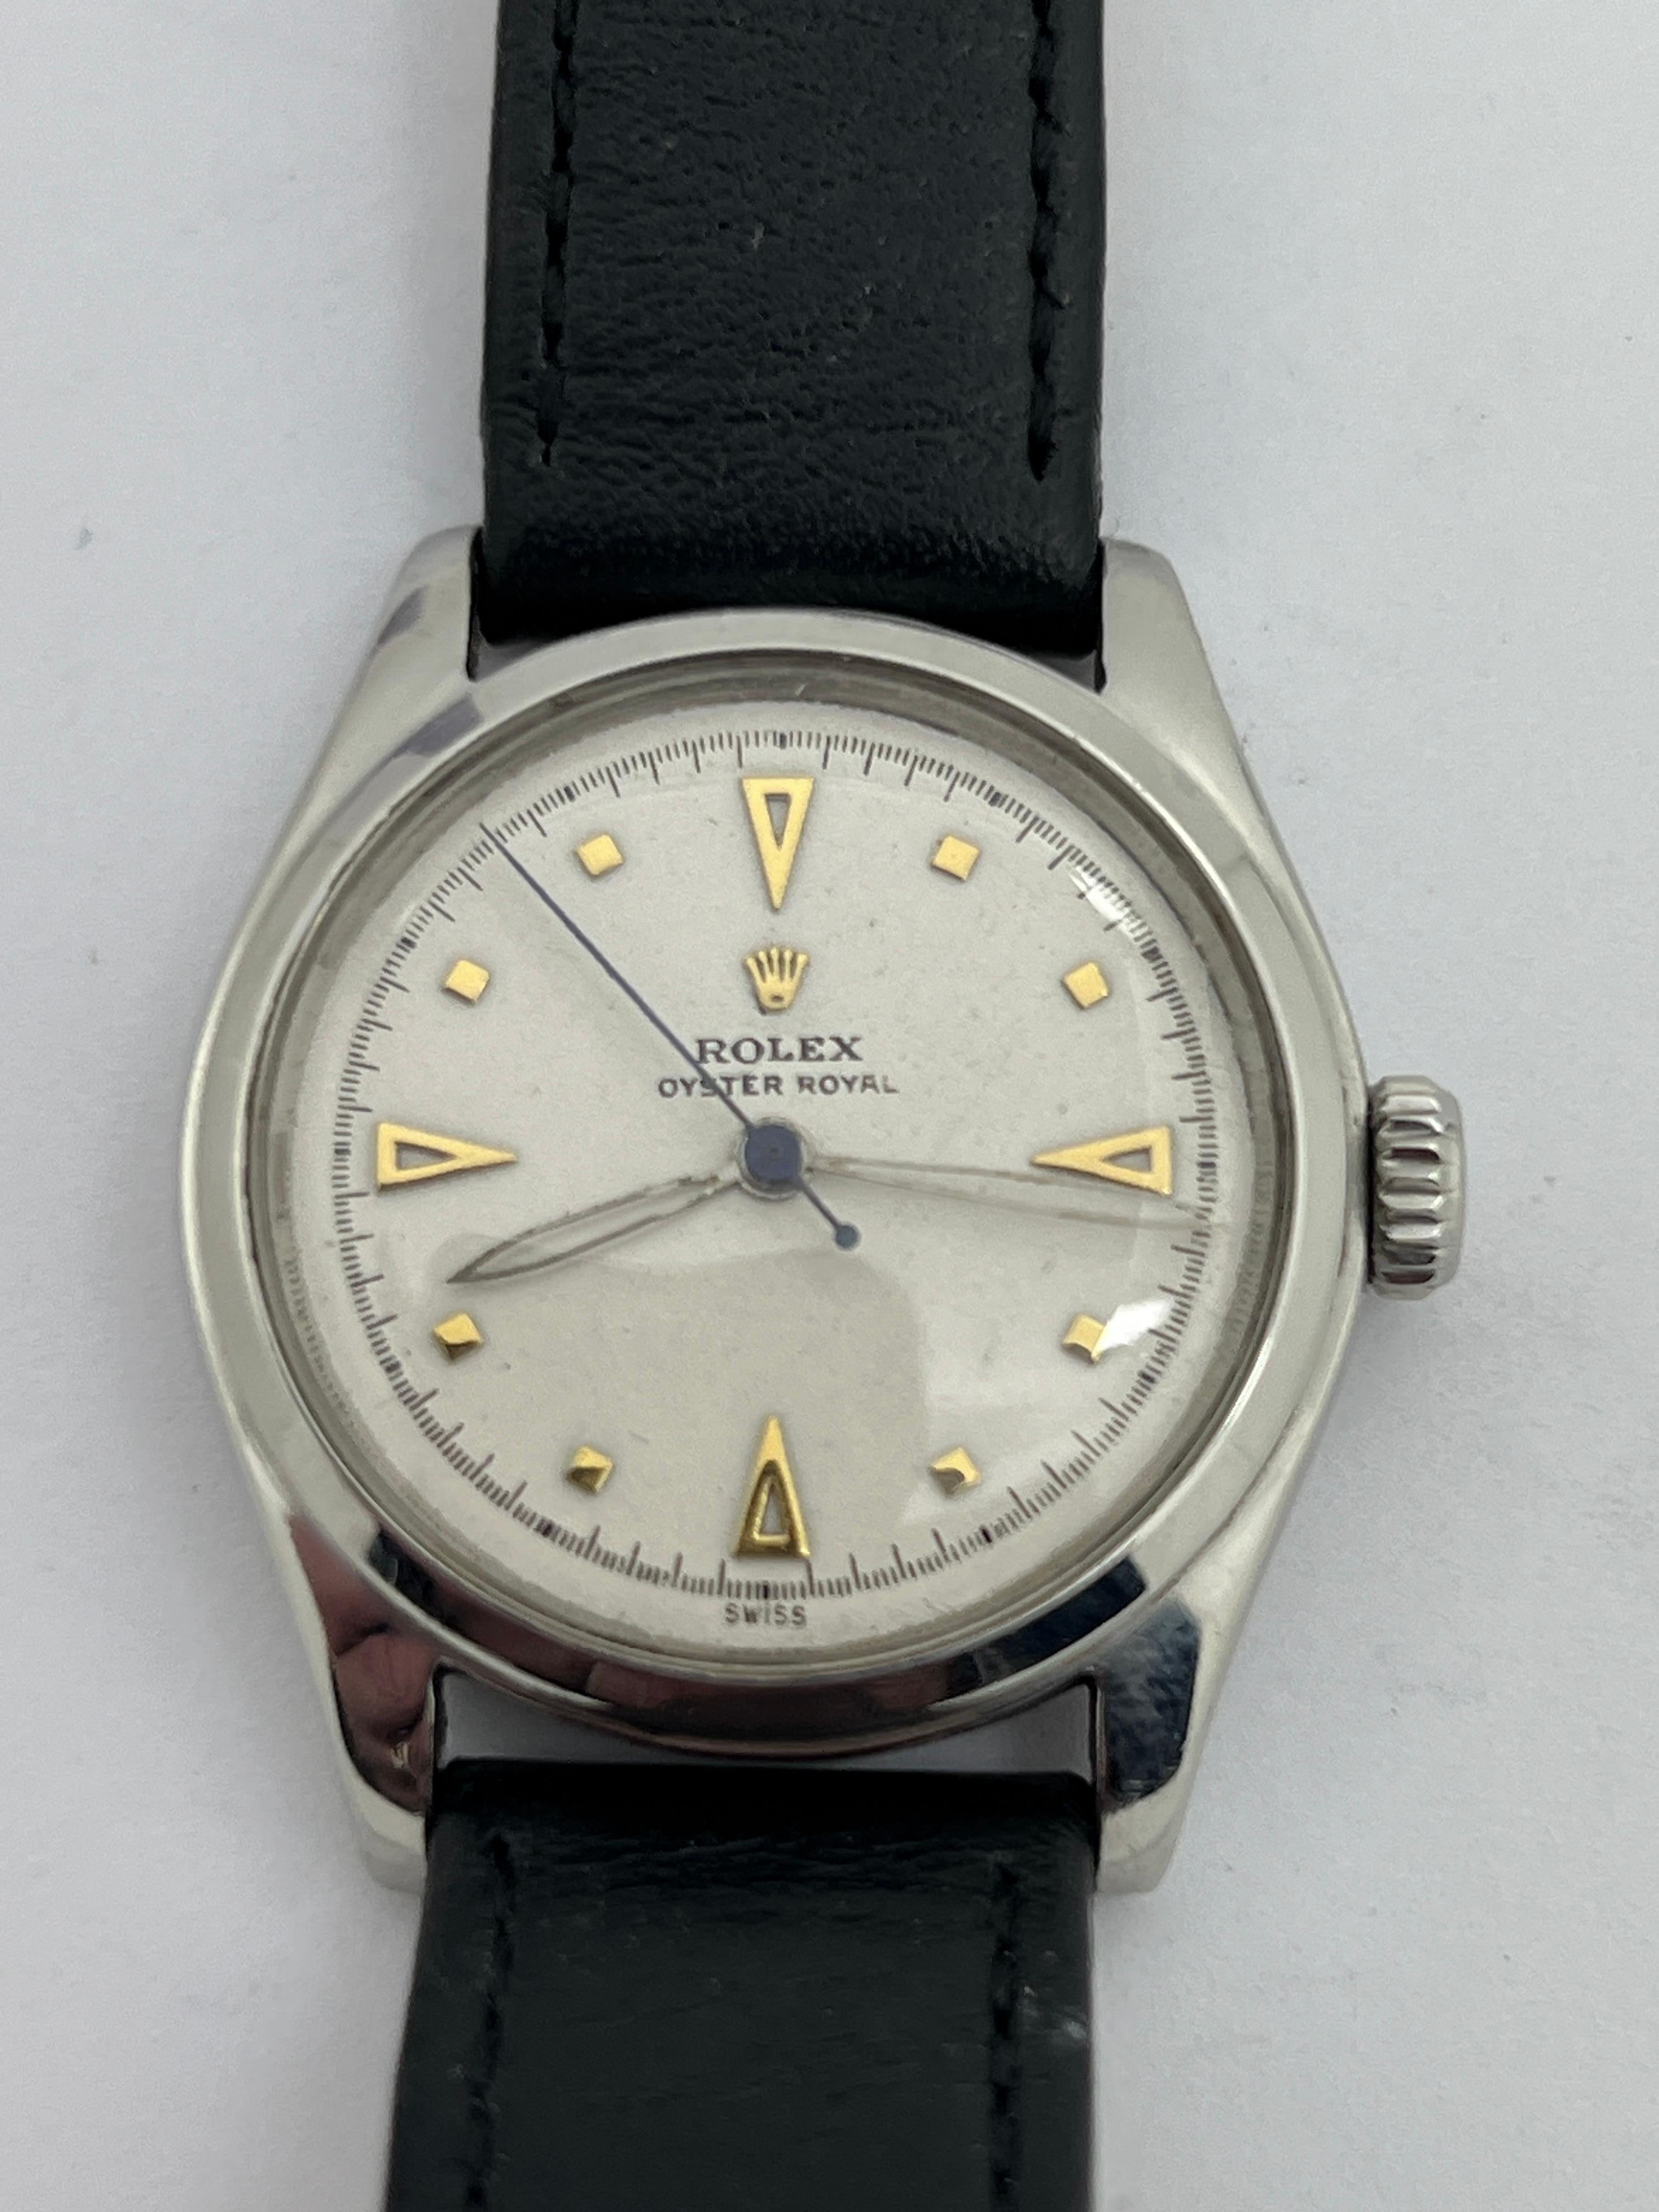 Rolex Royal Precision, 1951, 15 Jewel Super Balance, Stainless Steel In Excellent Condition For Sale In Raleigh, NC